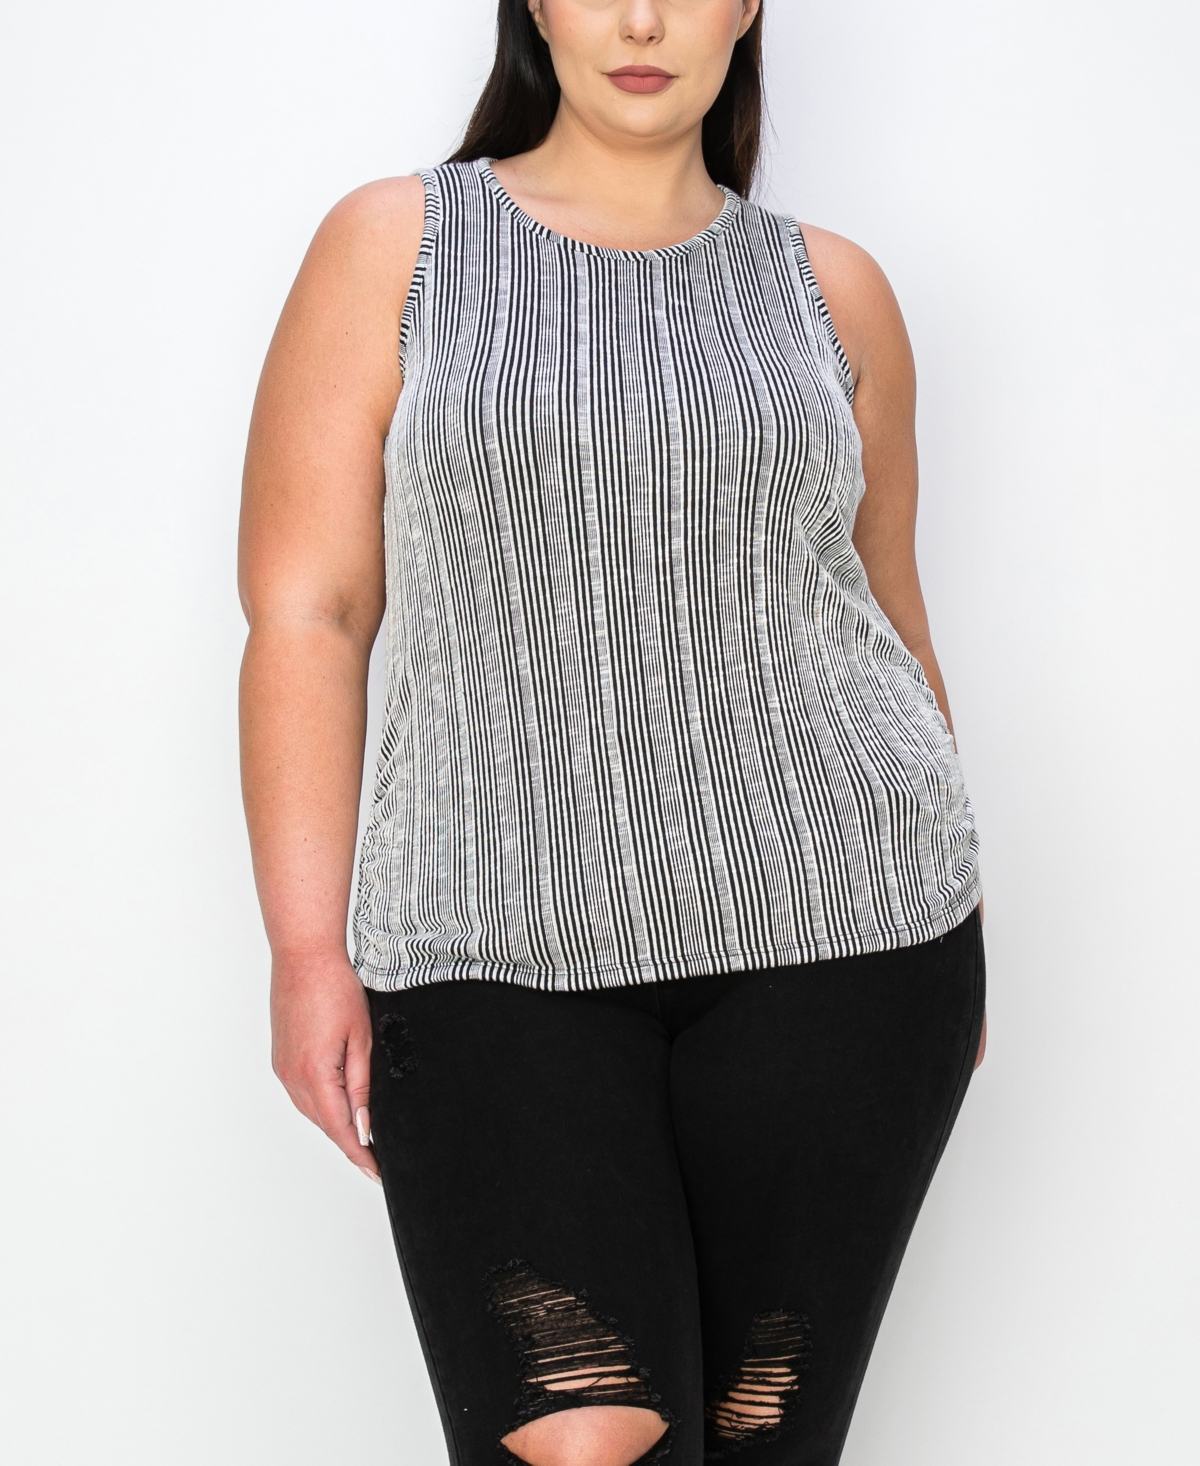 Coin 1804 Plus Size Variegated Textured Stripe Ruched Tank Top In Black Ivory